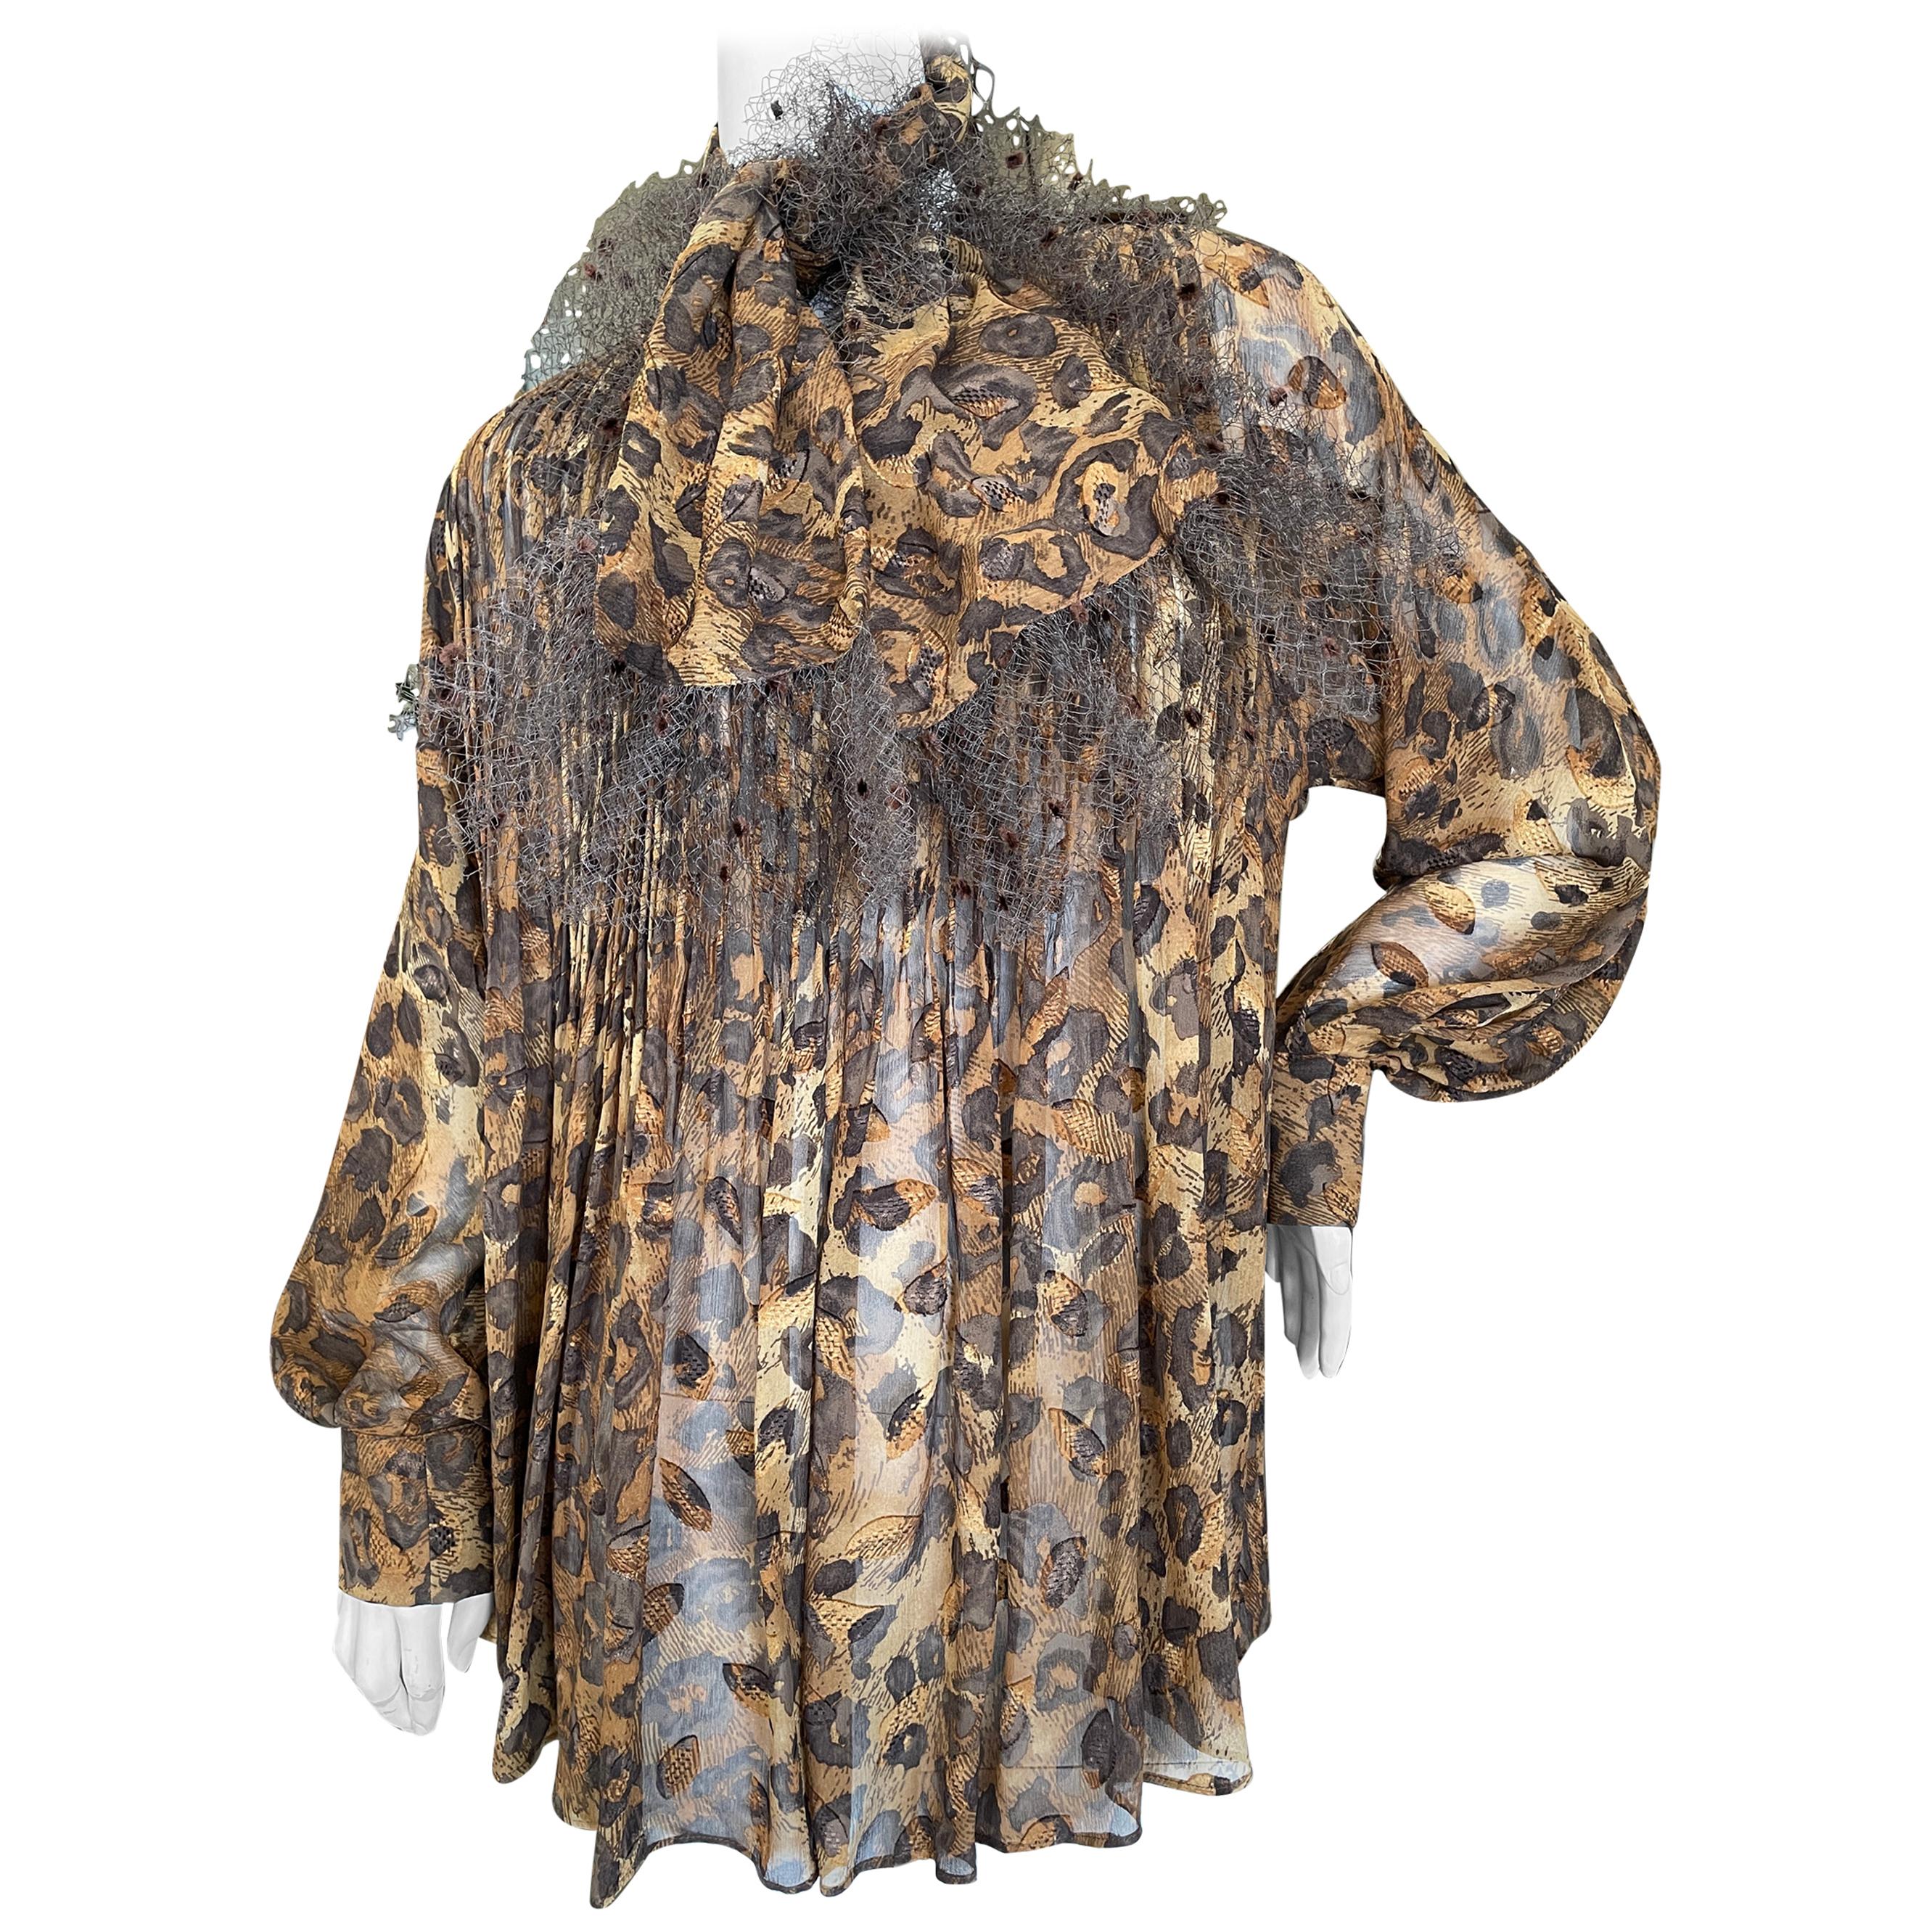  Gianfranco Ferre Vintage Sheer Pleated Leopard Print Silk Blouse and Scarf For Sale